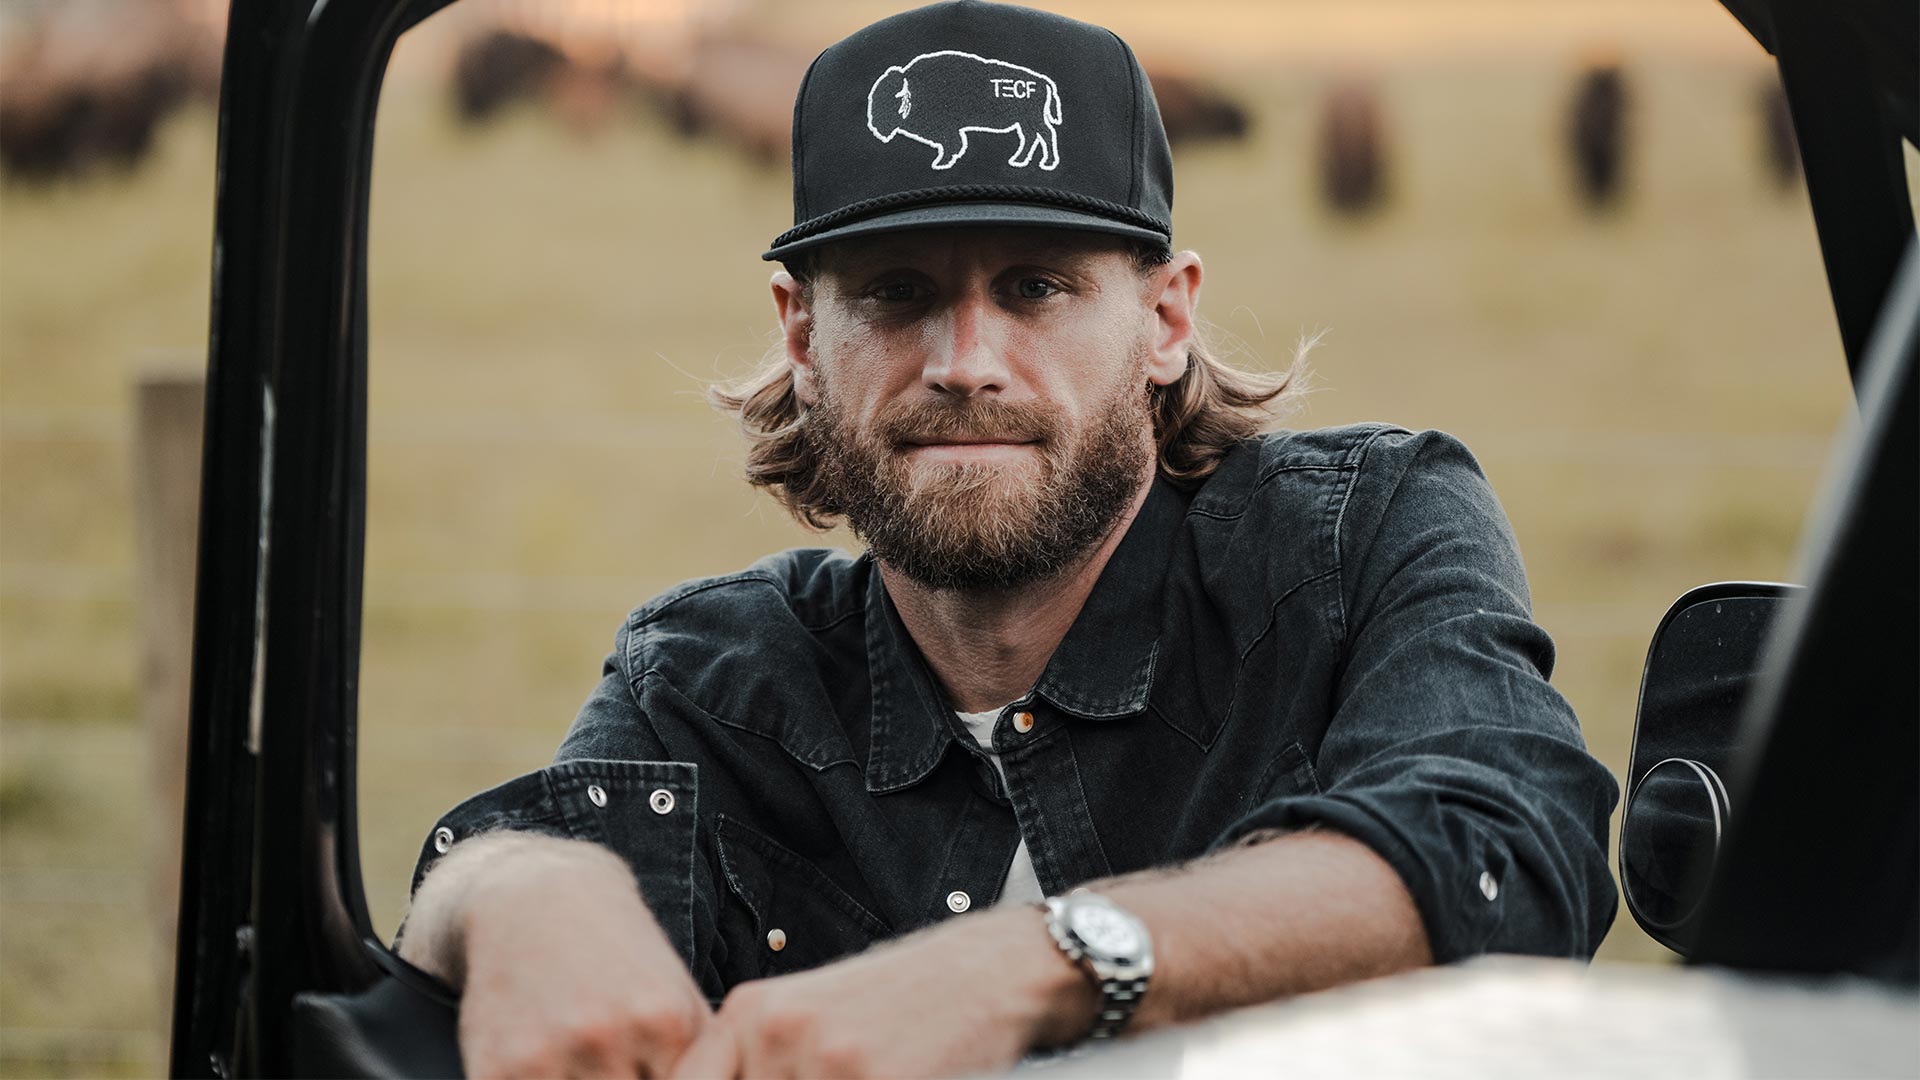 Chase Rice - 05.04.23 - The Factory - St. Louis, MO